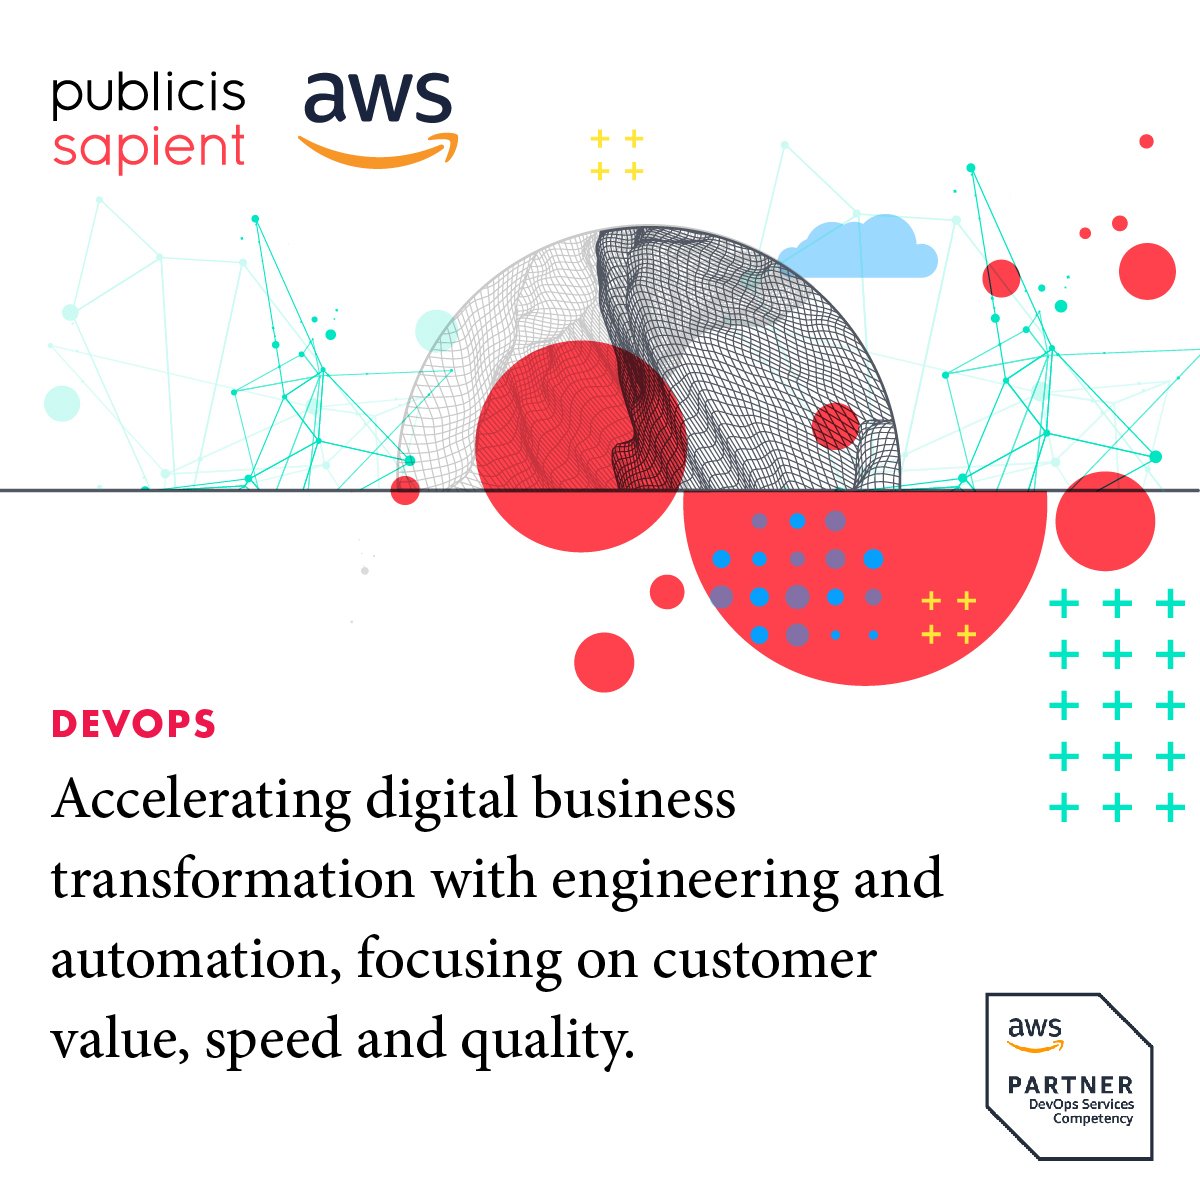 Proud of our partnership with #AWS and our competency in delivering #DevOps solutions. Explore how #PublicisSapient together with AWS is helping our clients accelerate their cloud journey. bit.ly/42zotjb